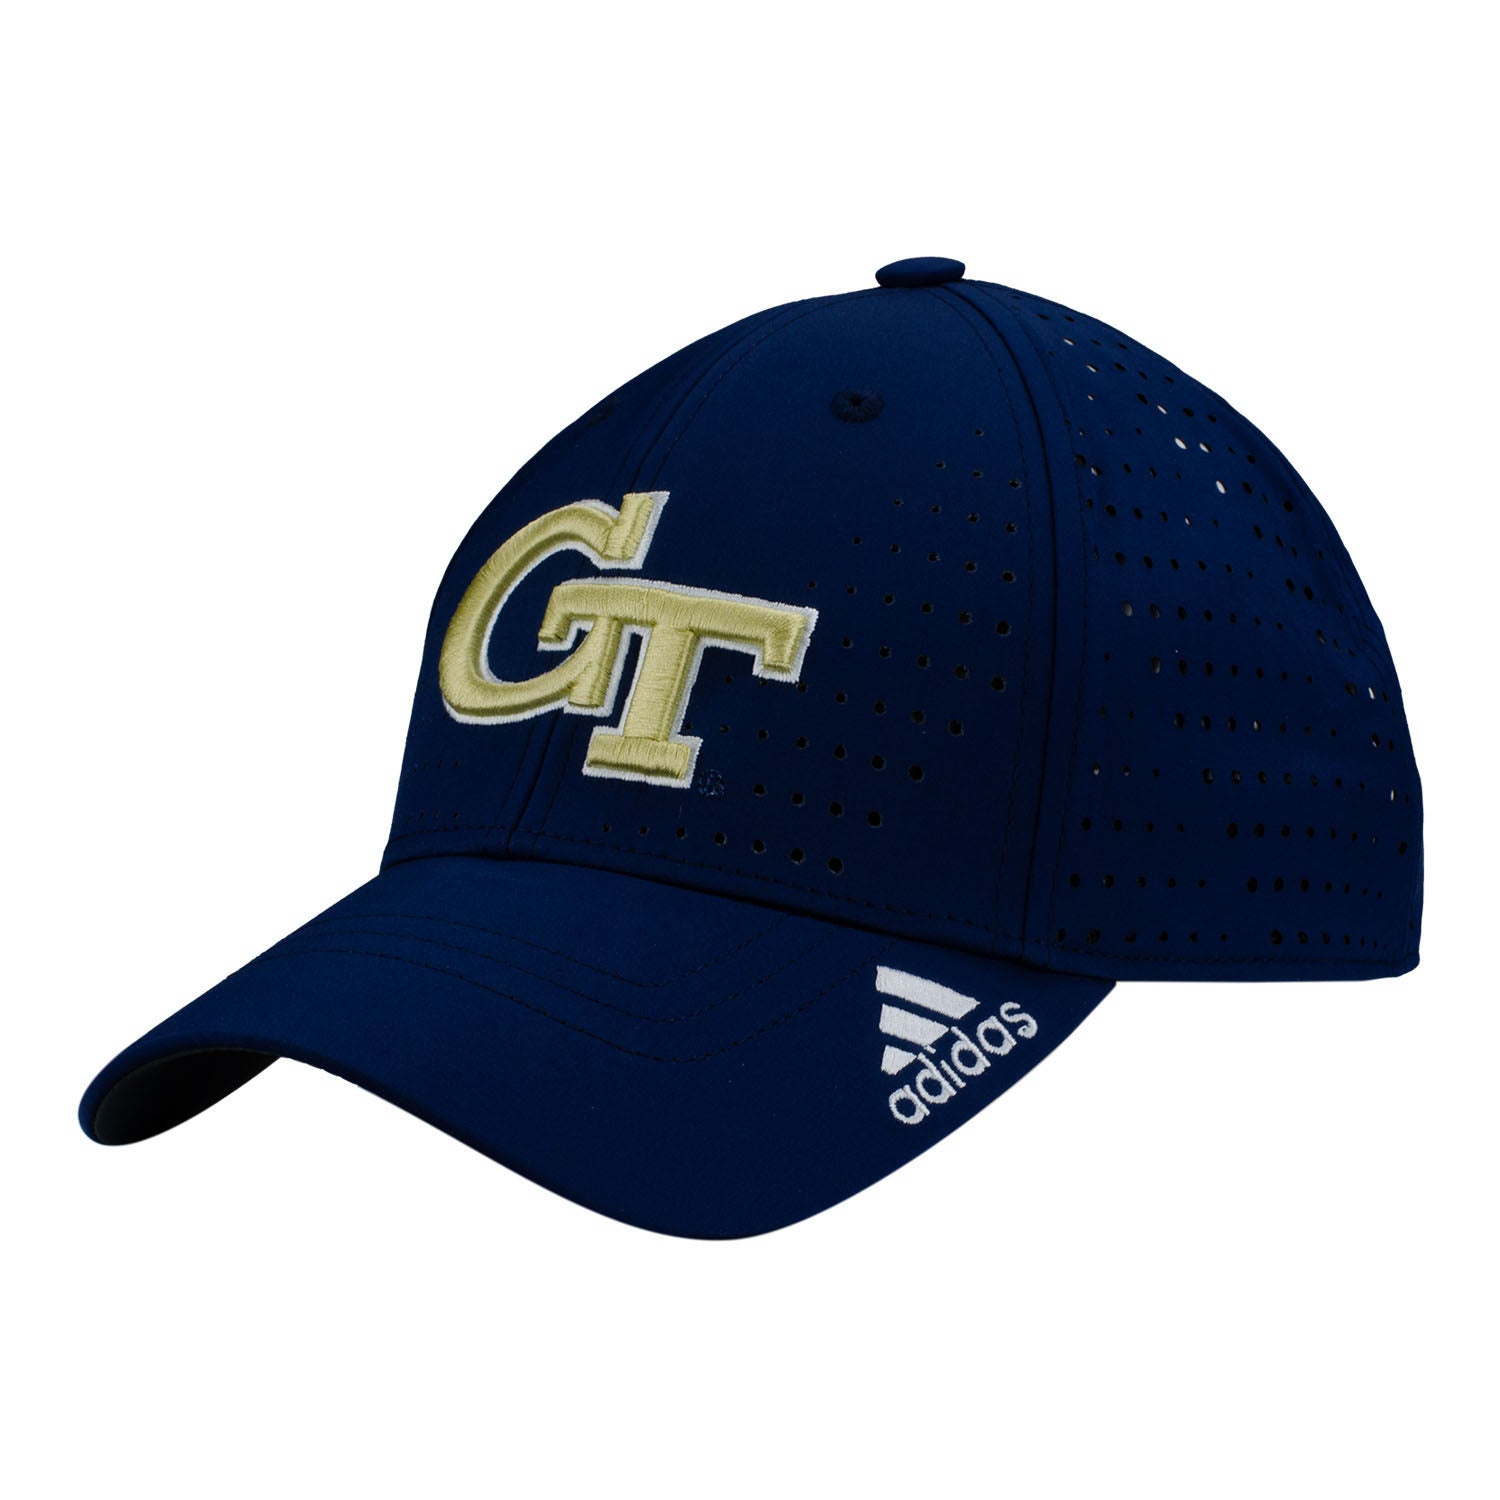 Georgia Tech Yellow Jackets Adidas Laser Perforated Adjustable Ha Georgia Tech Official Online Store